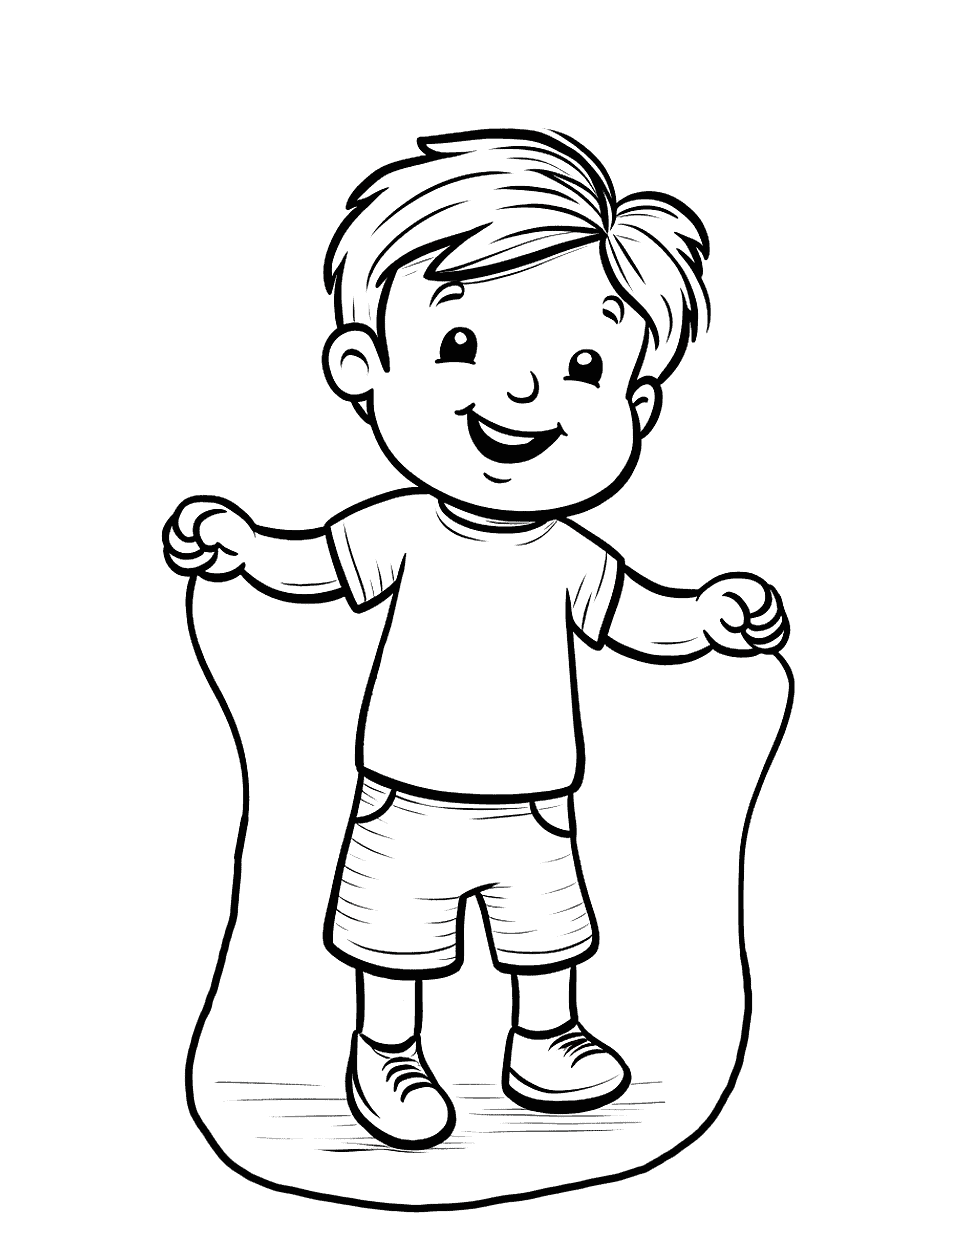 Playground Adventure Coloring Page - A kid playing with a jump rope.